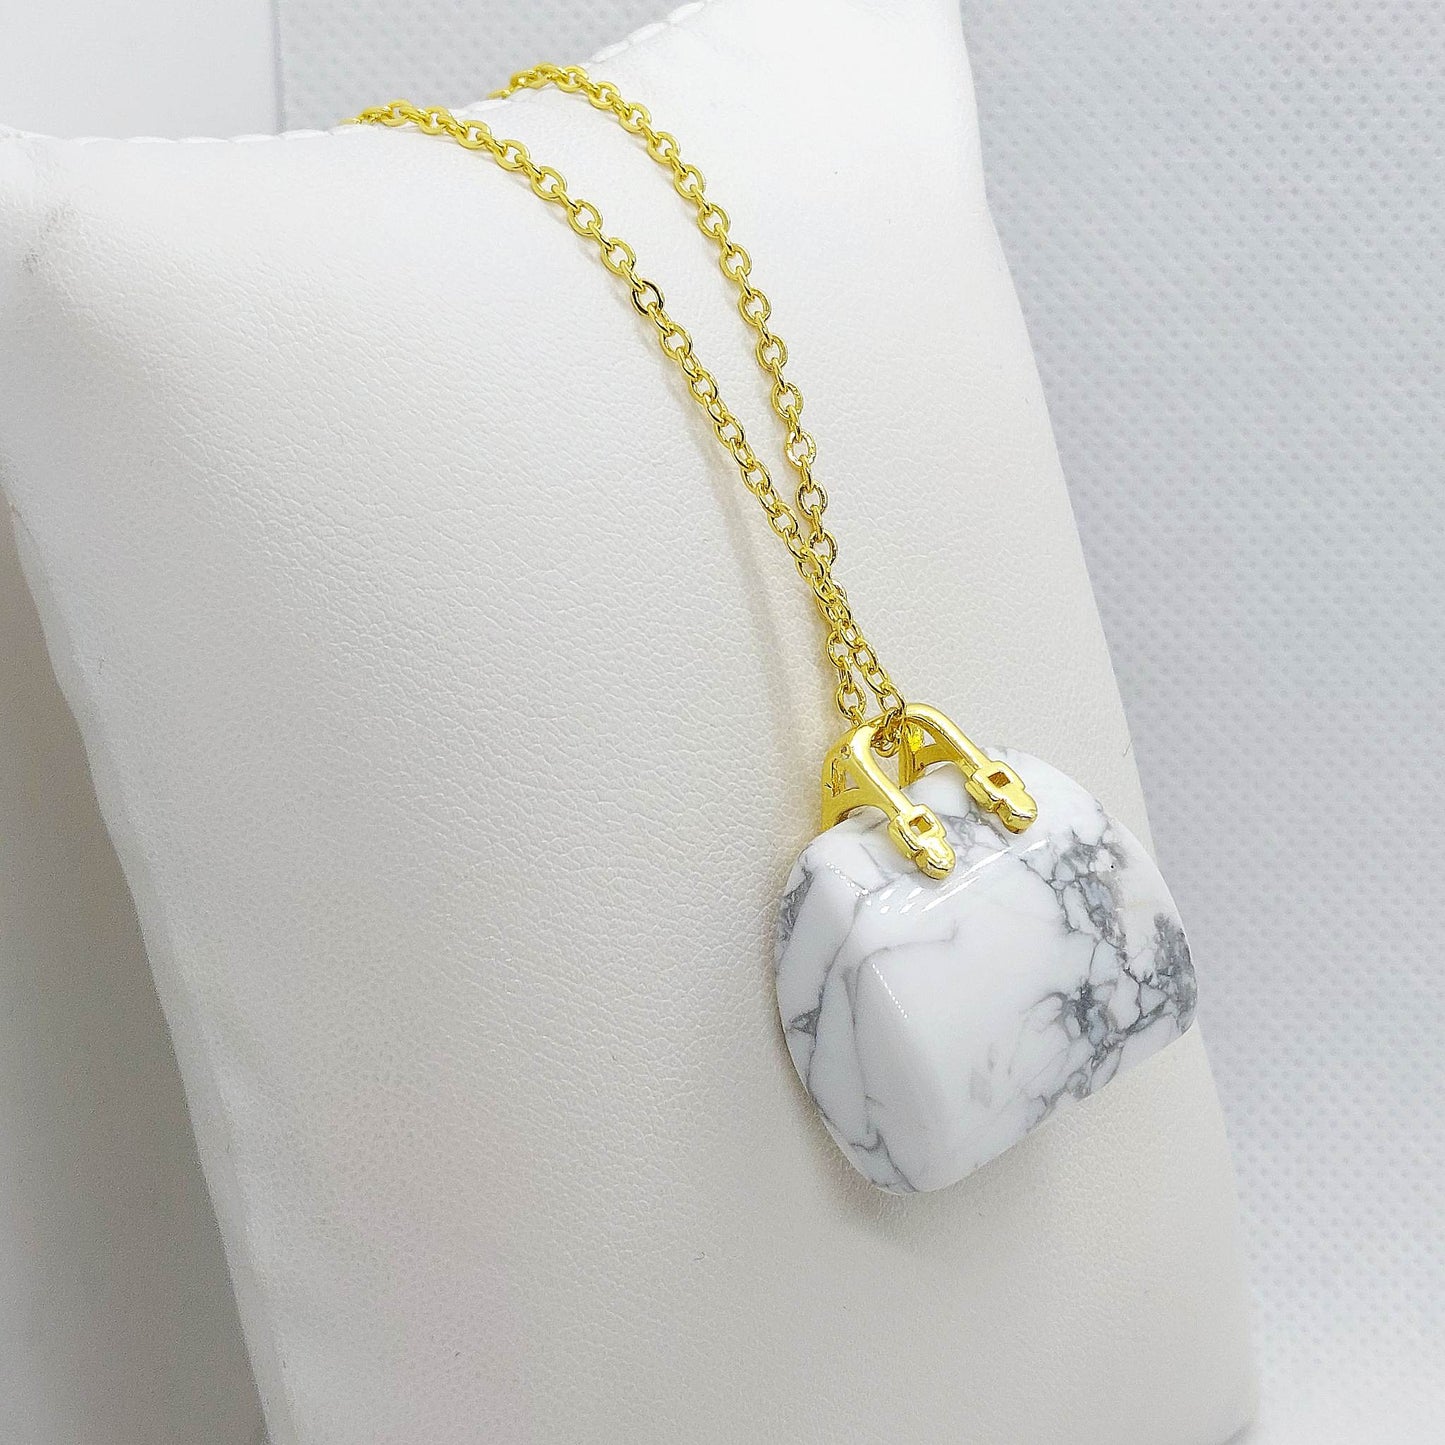 Natural White Howlite Handbag Pendant - Stainless Steel Gold Plated Chain Necklace